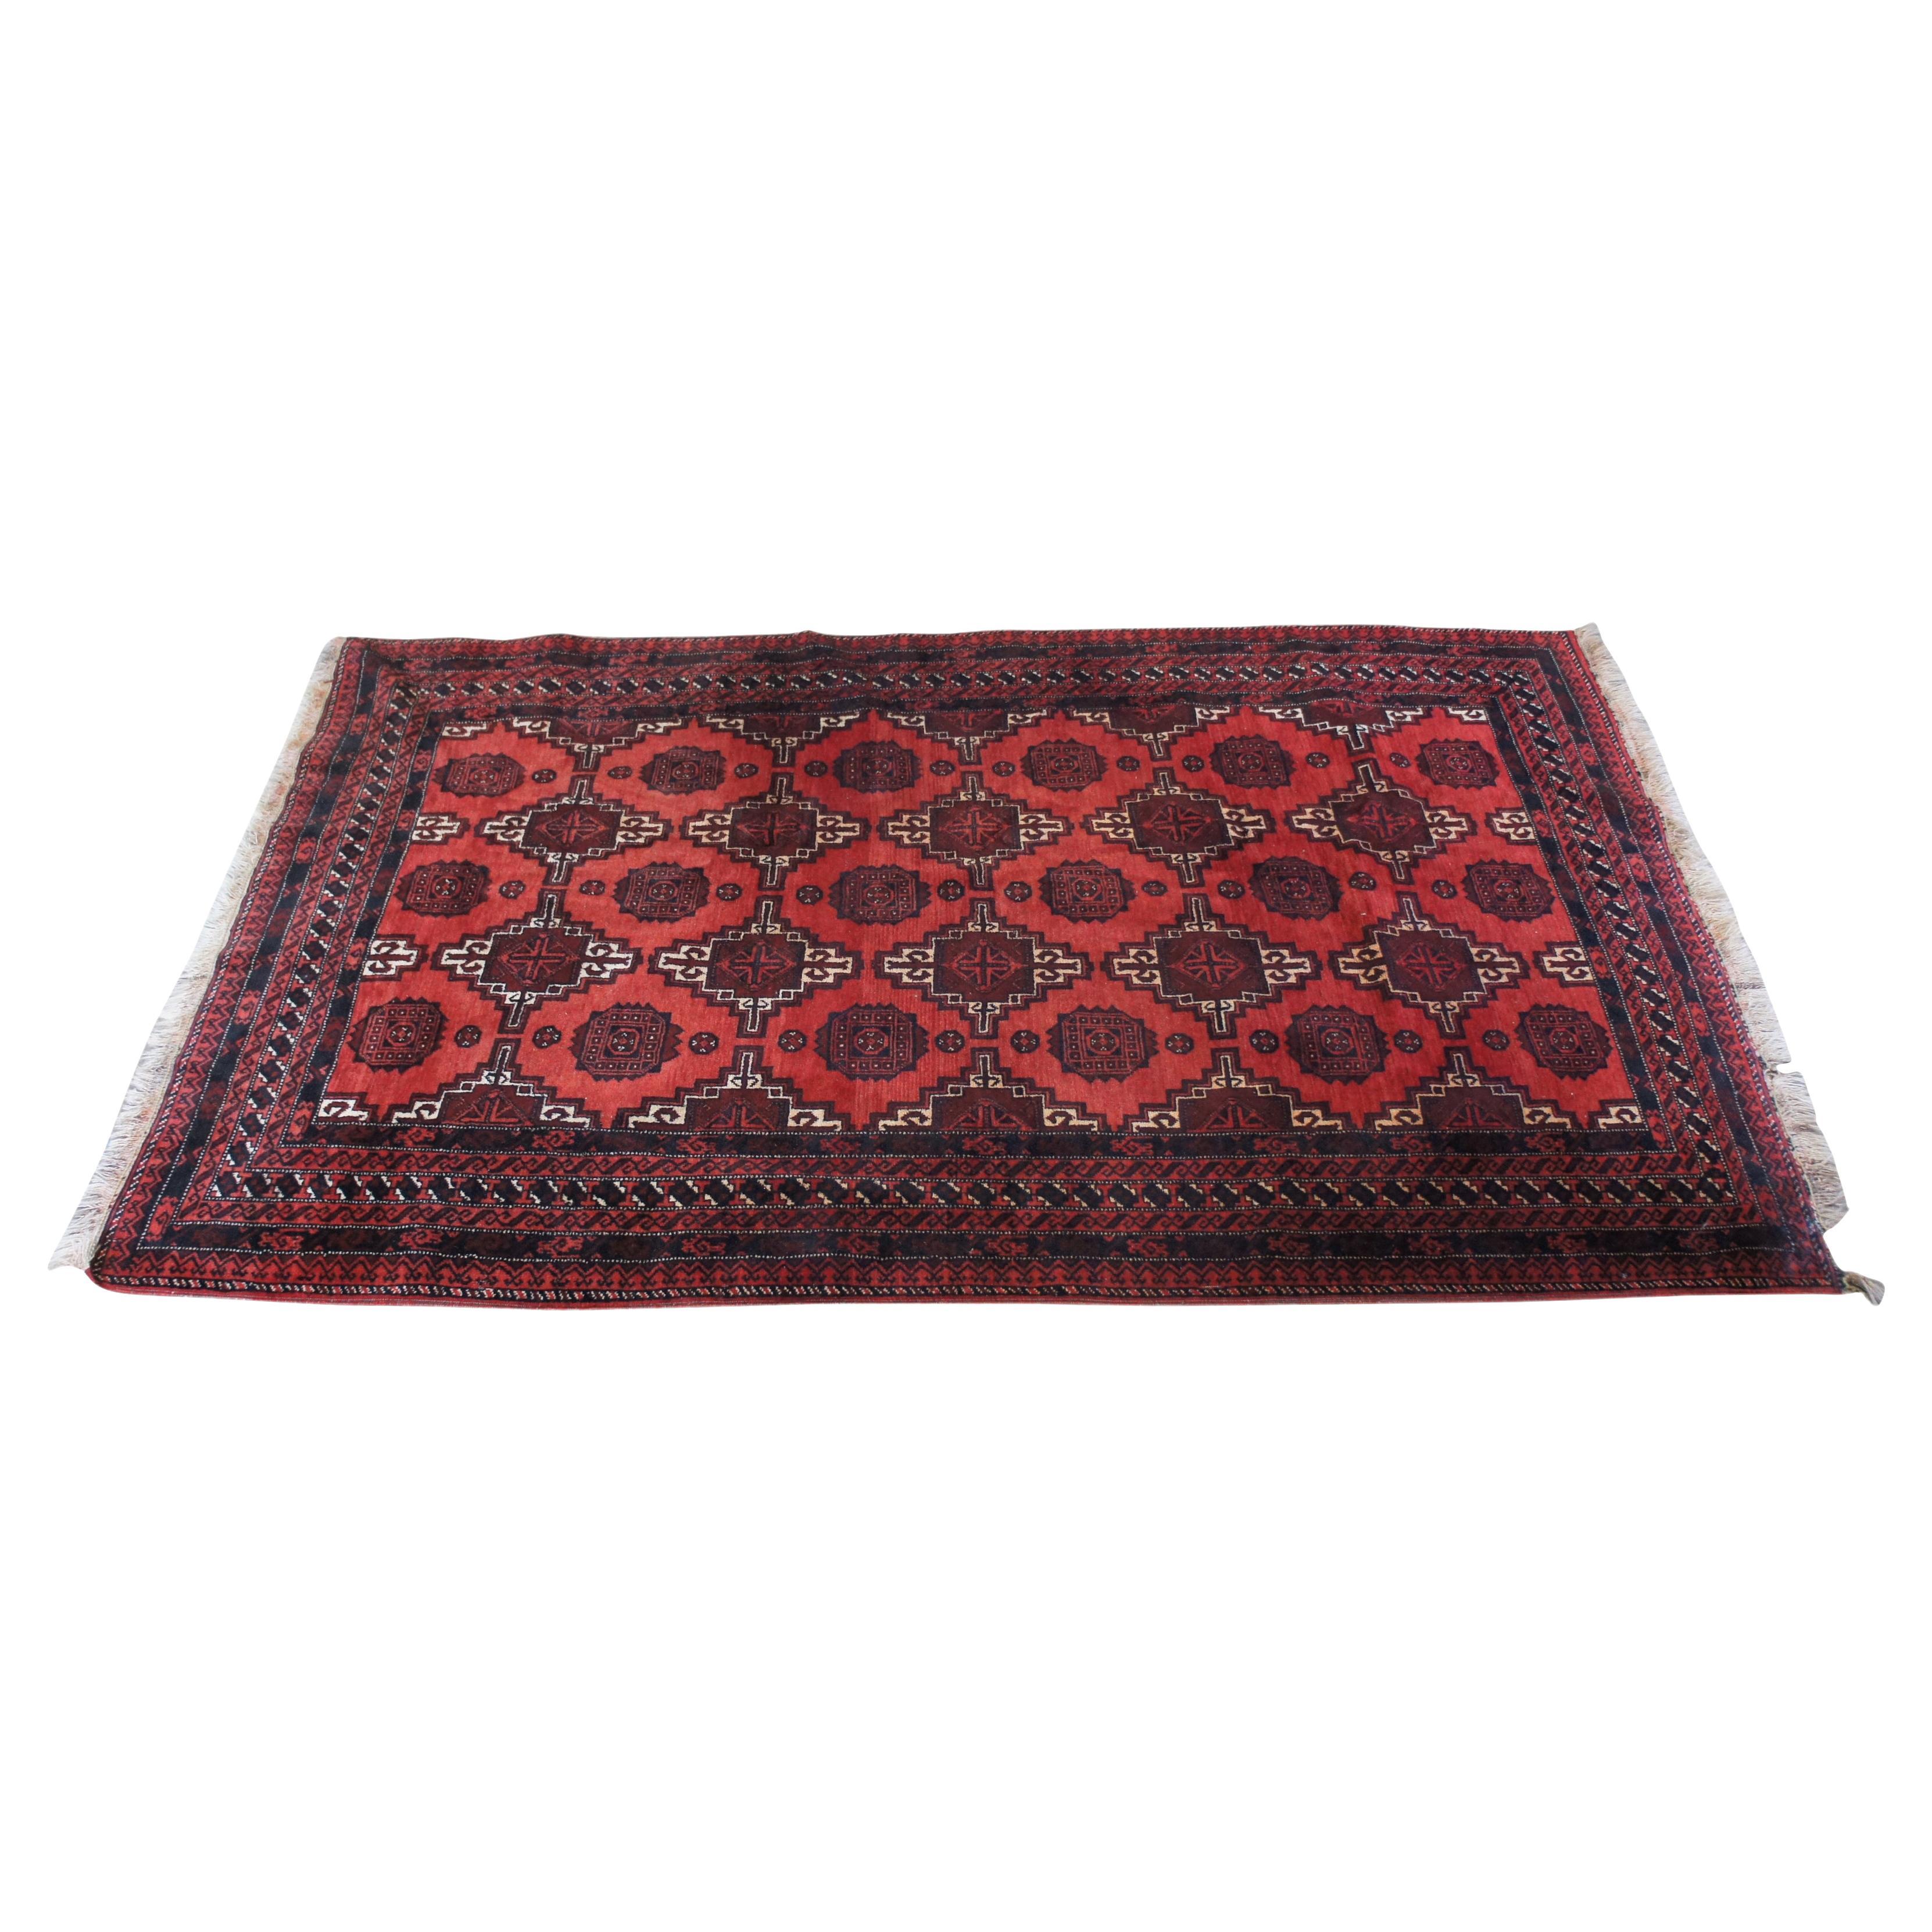 Vintage Hand Knotted Geometric Wool Red Area Rug 4'4" x 8' For Sale